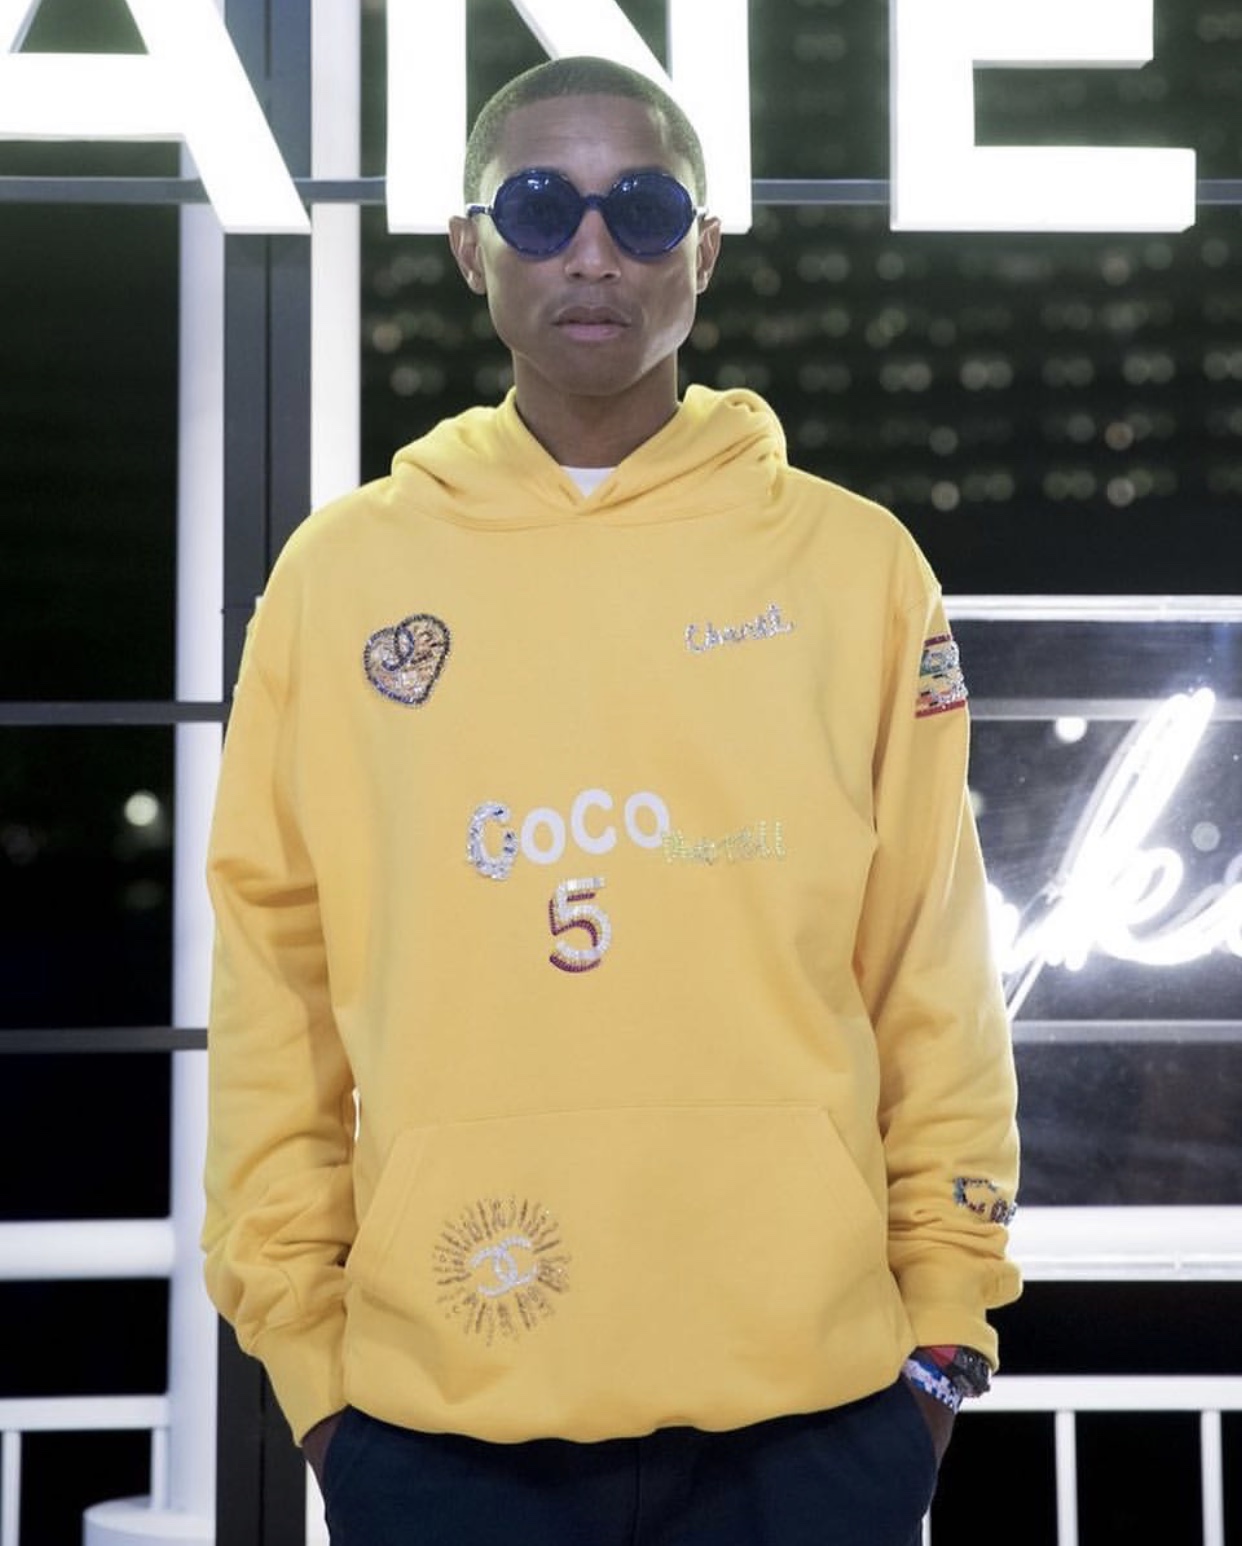 The Chanel Pharrell Williams Urban Capsule Collection debuts in